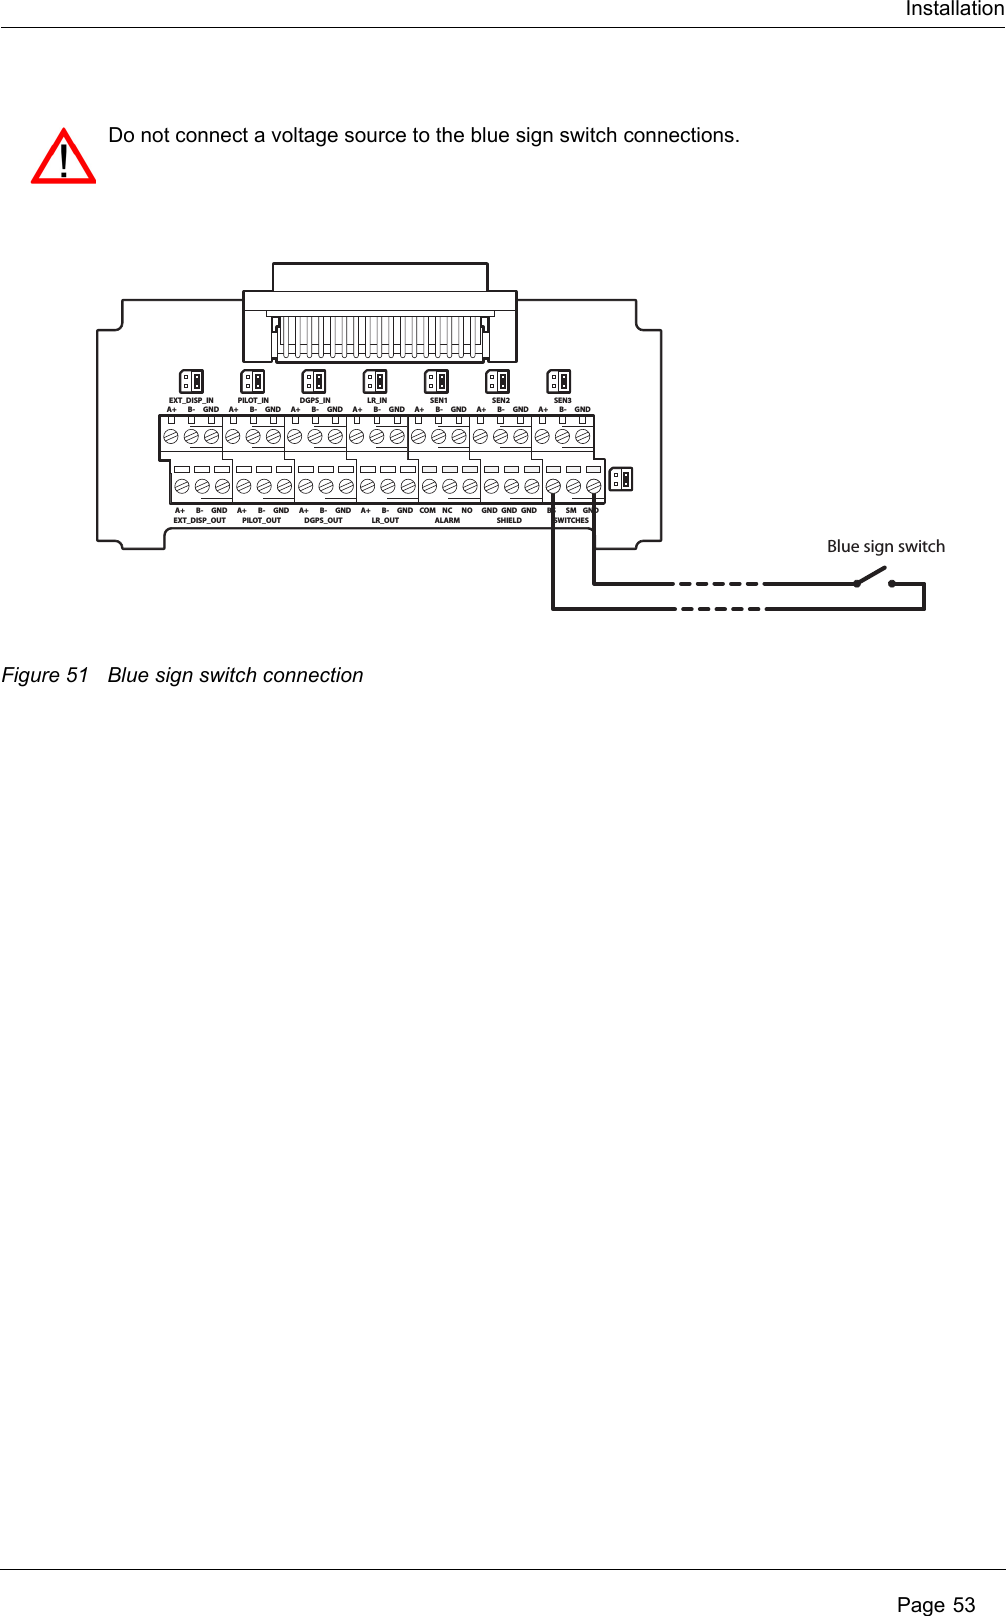 InstallationPage 53Figure 51 Blue sign switch connectionDo not connect a voltage source to the blue sign switch connections. A+ B-EXT_DISP_INGND A+ B-PILOT_INGND A+ B-DGPS_INGND A+ B-LR_INGND A+ B-SEN1GND A+ B-SEN2GND A+ B-SEN3GNDA+ B-EXT_DISP_OUTGND A+ B-PILOT_OUTGND A+ B-DGPS_OUTGND A+ B-LR_OUTGND COM NCALARMNO GND GNDSHIELDGNDBlue sign switchBS SMSWITCHESGND